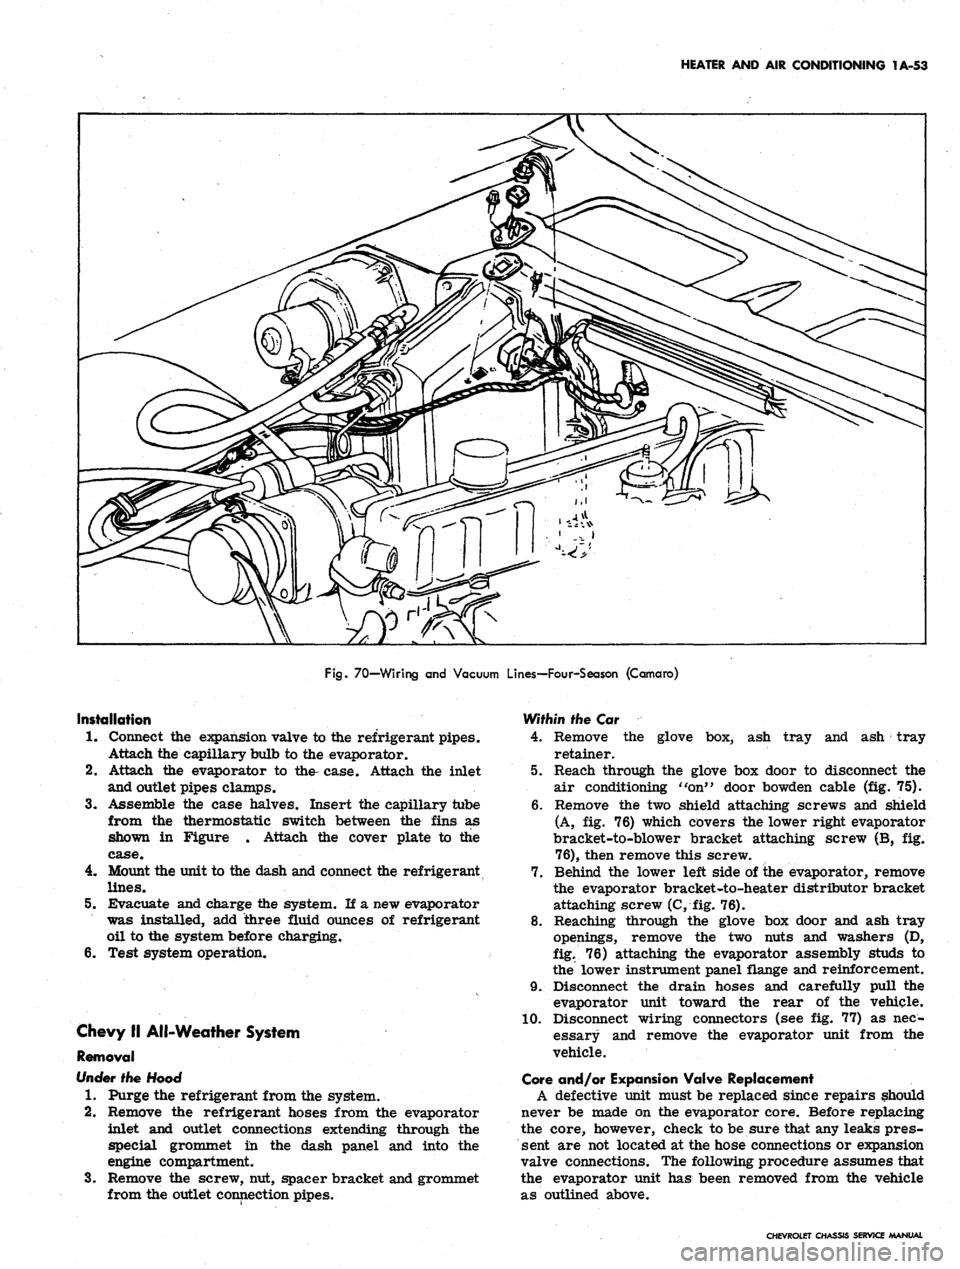 CHEVROLET CAMARO 1967 1.G Chassis Workshop Manual 
HEATER AND AIR CONDITIONING 1A-53

Fig.
 70—Wiring and Vacuum Lines—Four-Season (Camaro)

Installation

1.
 Connect the expansion valve to the refrigerant pipes.

Attach the capillary bulb to the